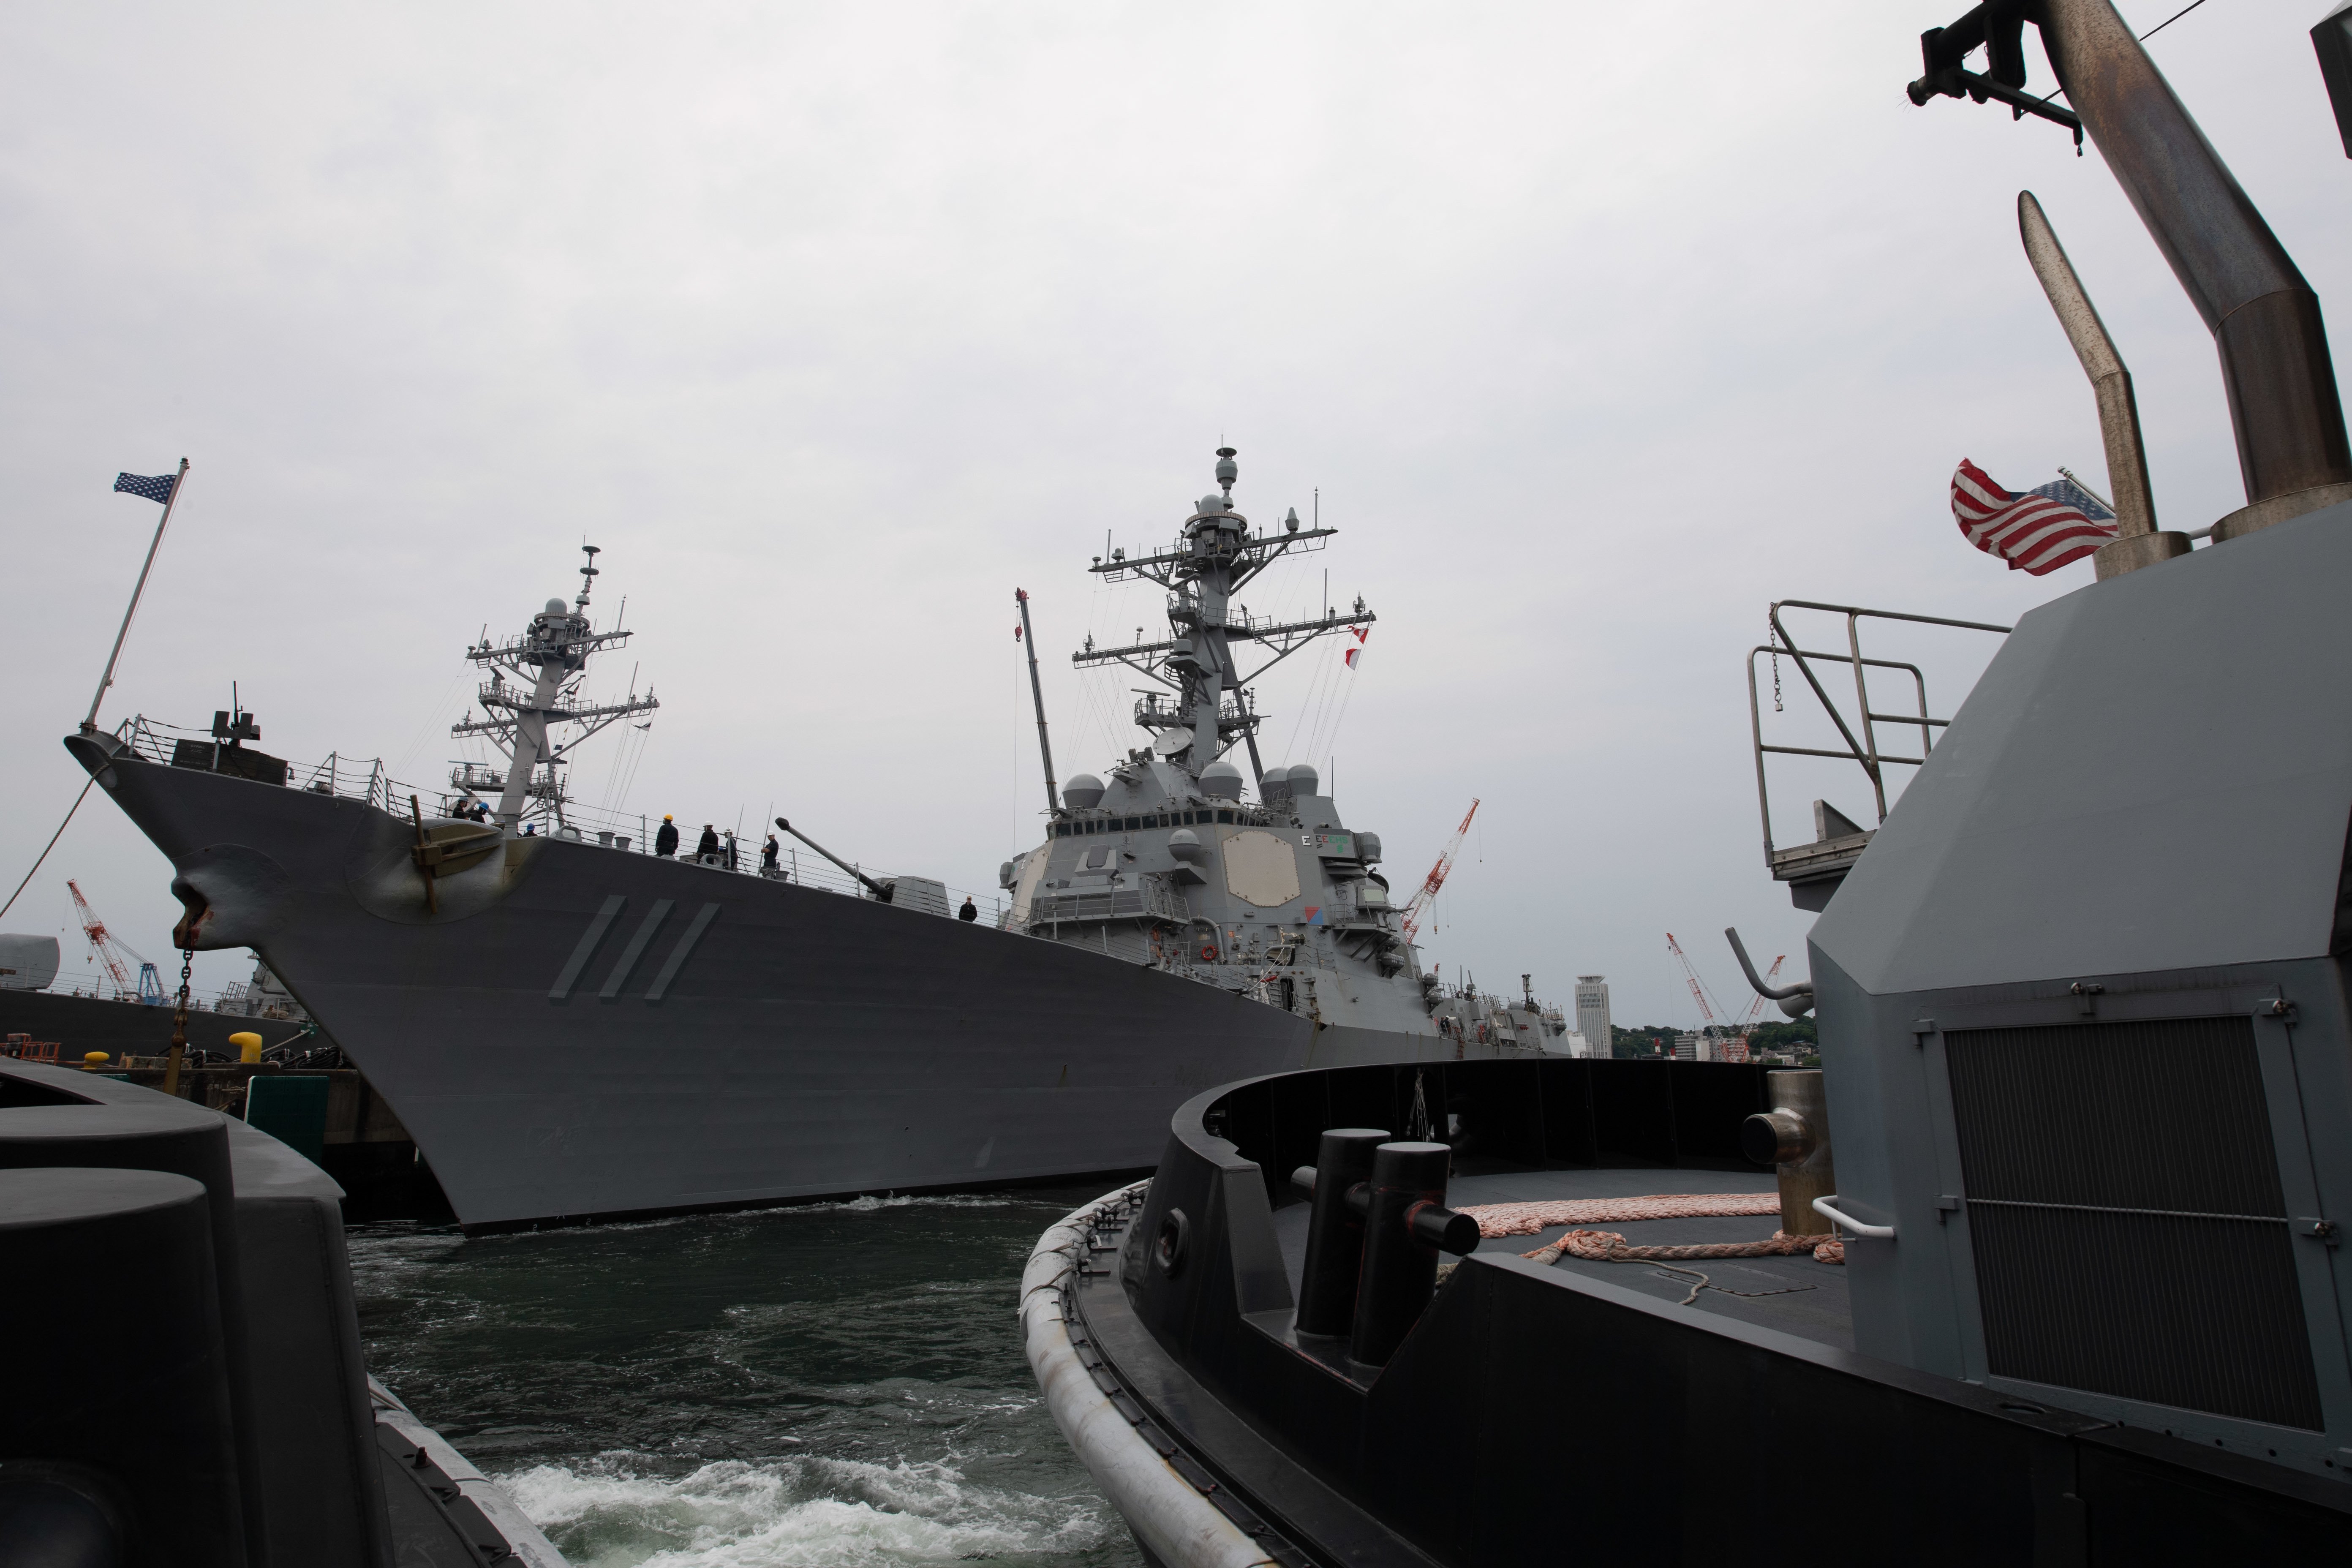 Marines Look to Two New Ship Classes to Define Future of